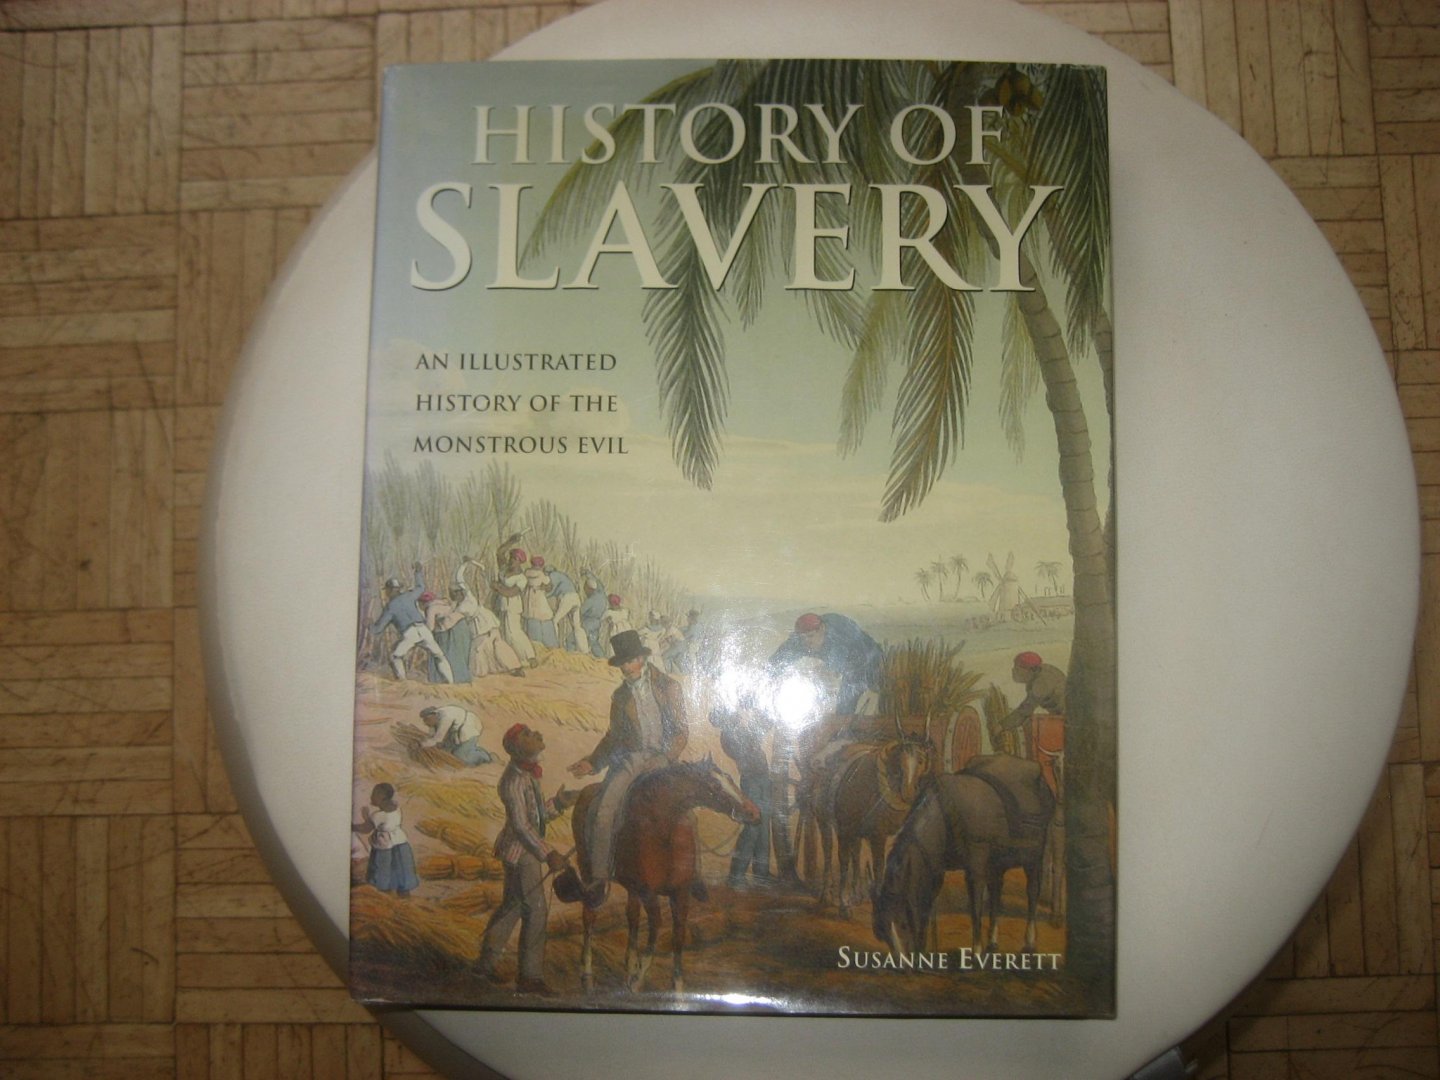 Susanne Everett - History of Slavery / An Illustrated History of the Monstrous Evil